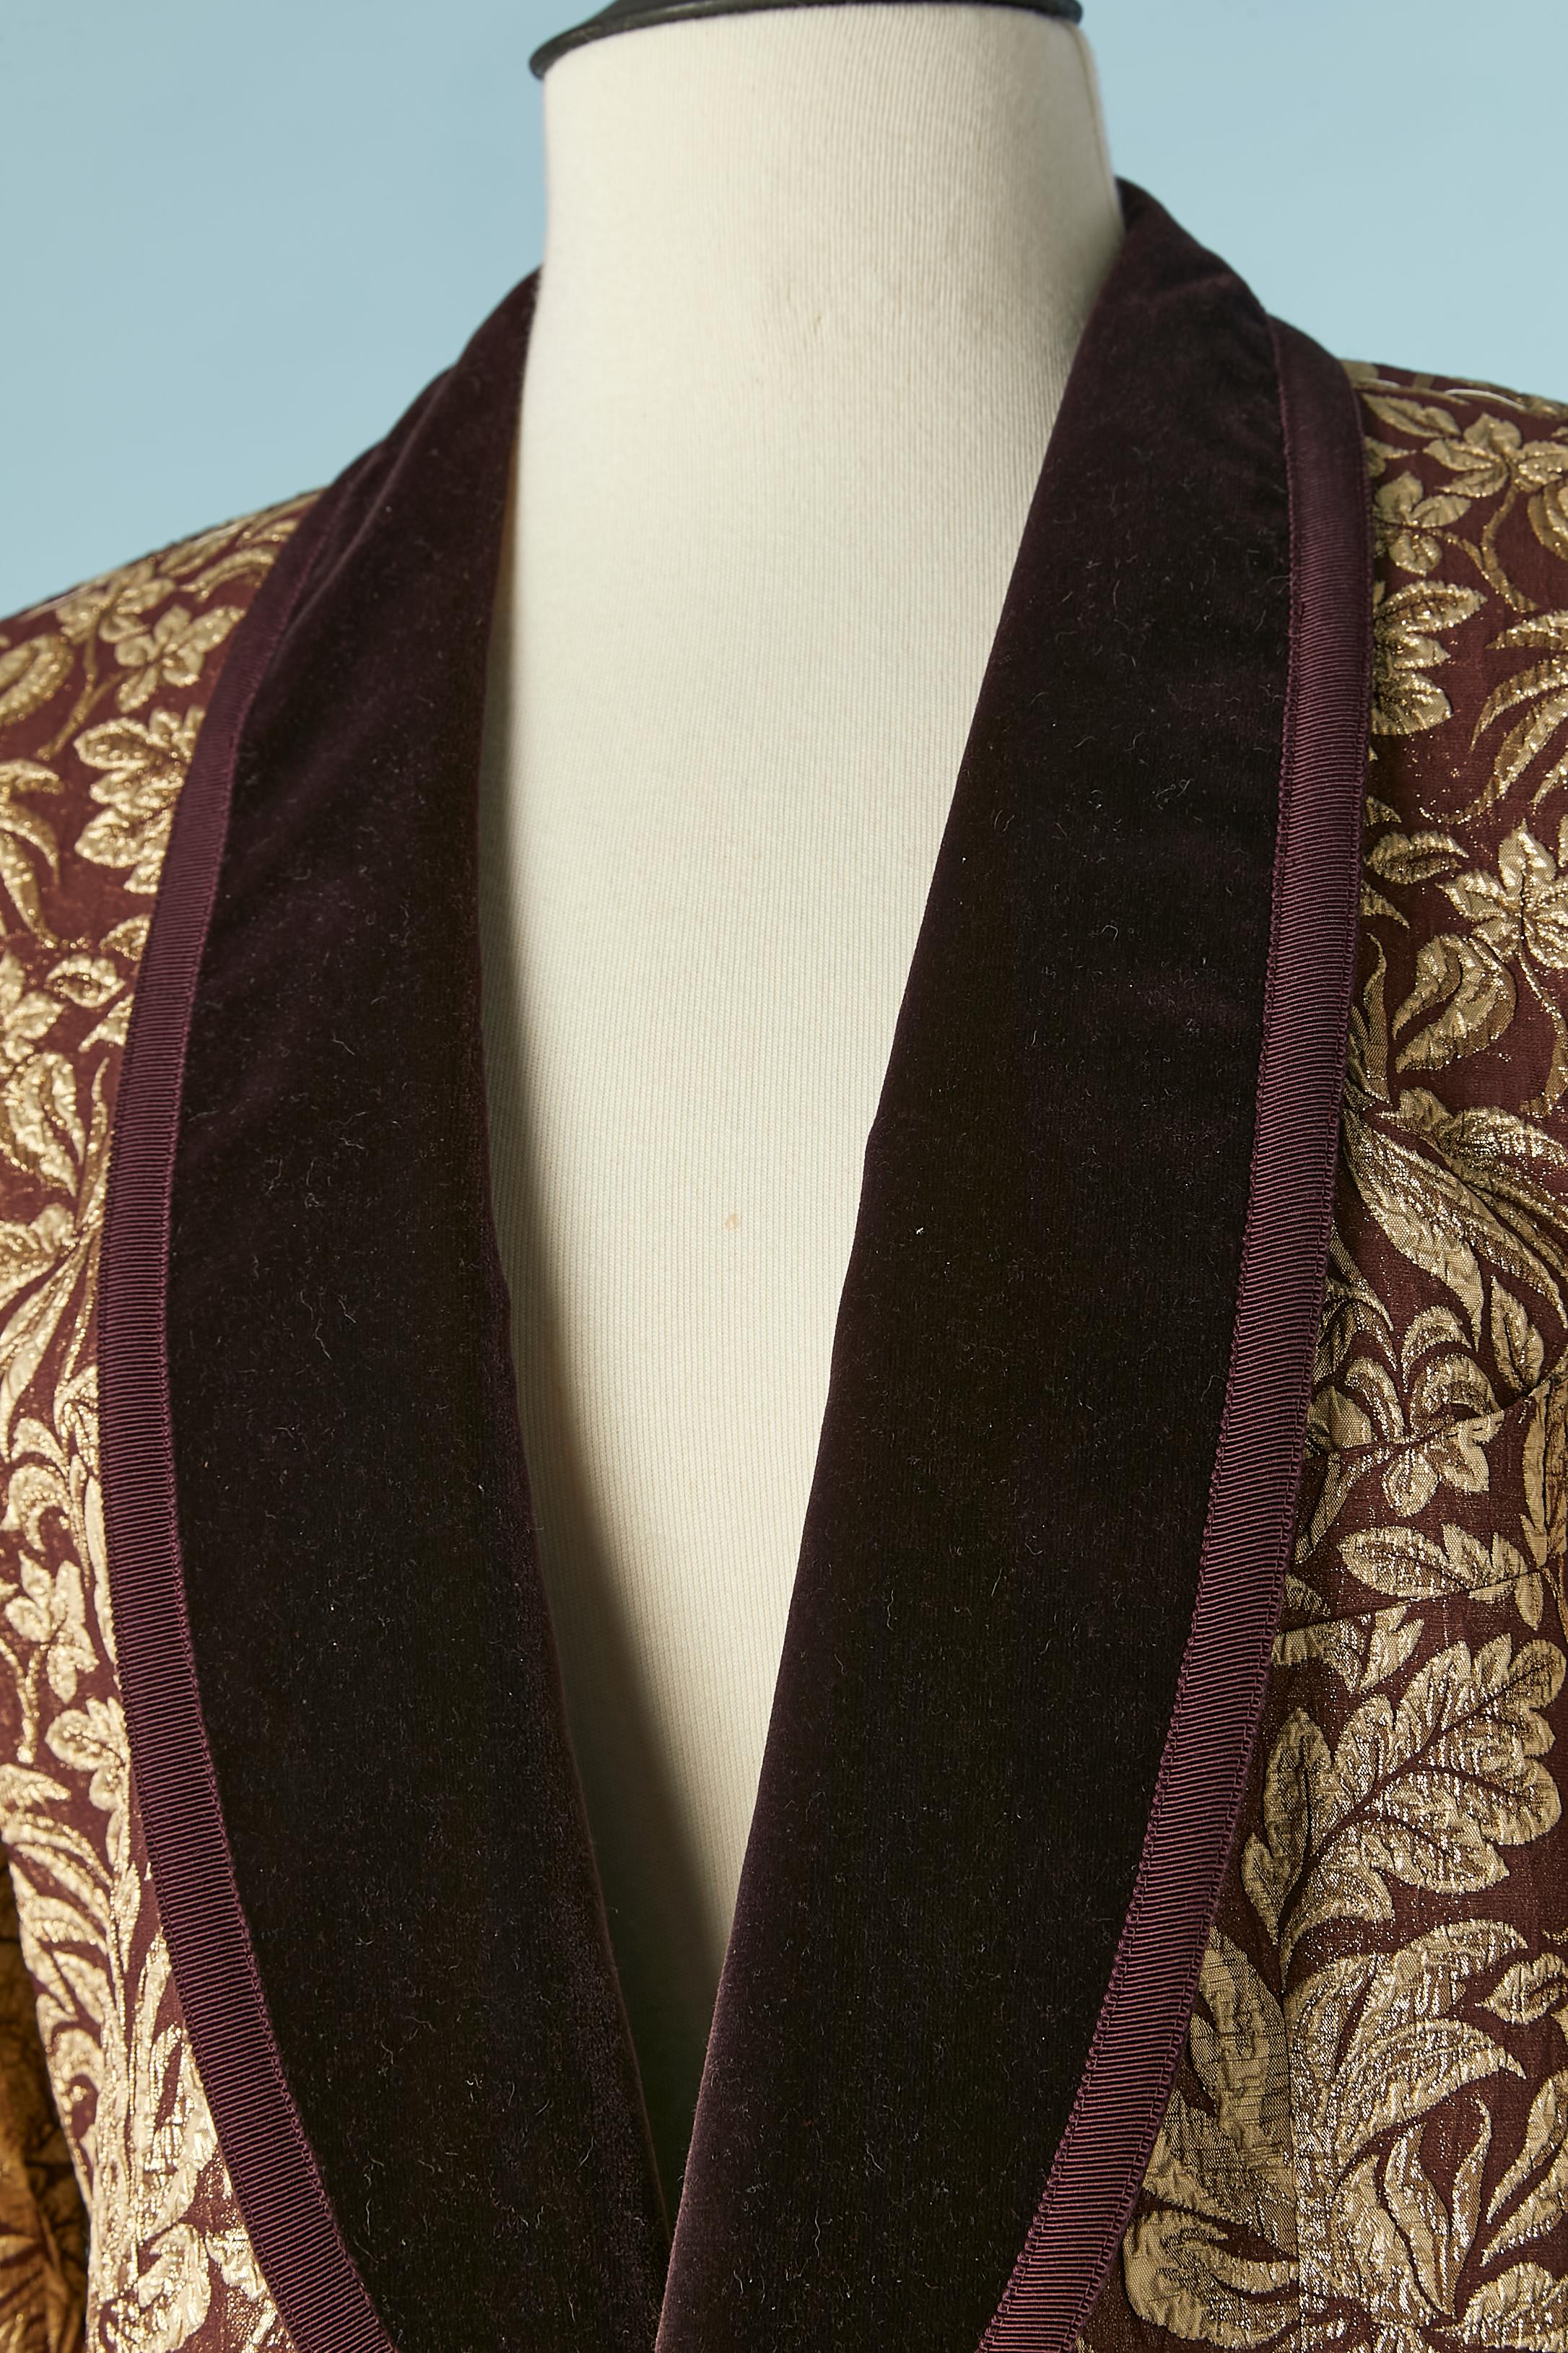 Tailored gold damask tuxedo jacket with burgundy velvet collar. Main fabric composition: 43% acetate, 39% silk, 18% polyester. 
Lining: 65% acetate, 35% rayon. 
One button ( covered with fabric) in the middle front. Shoulder-pad. 3 inside pocket.